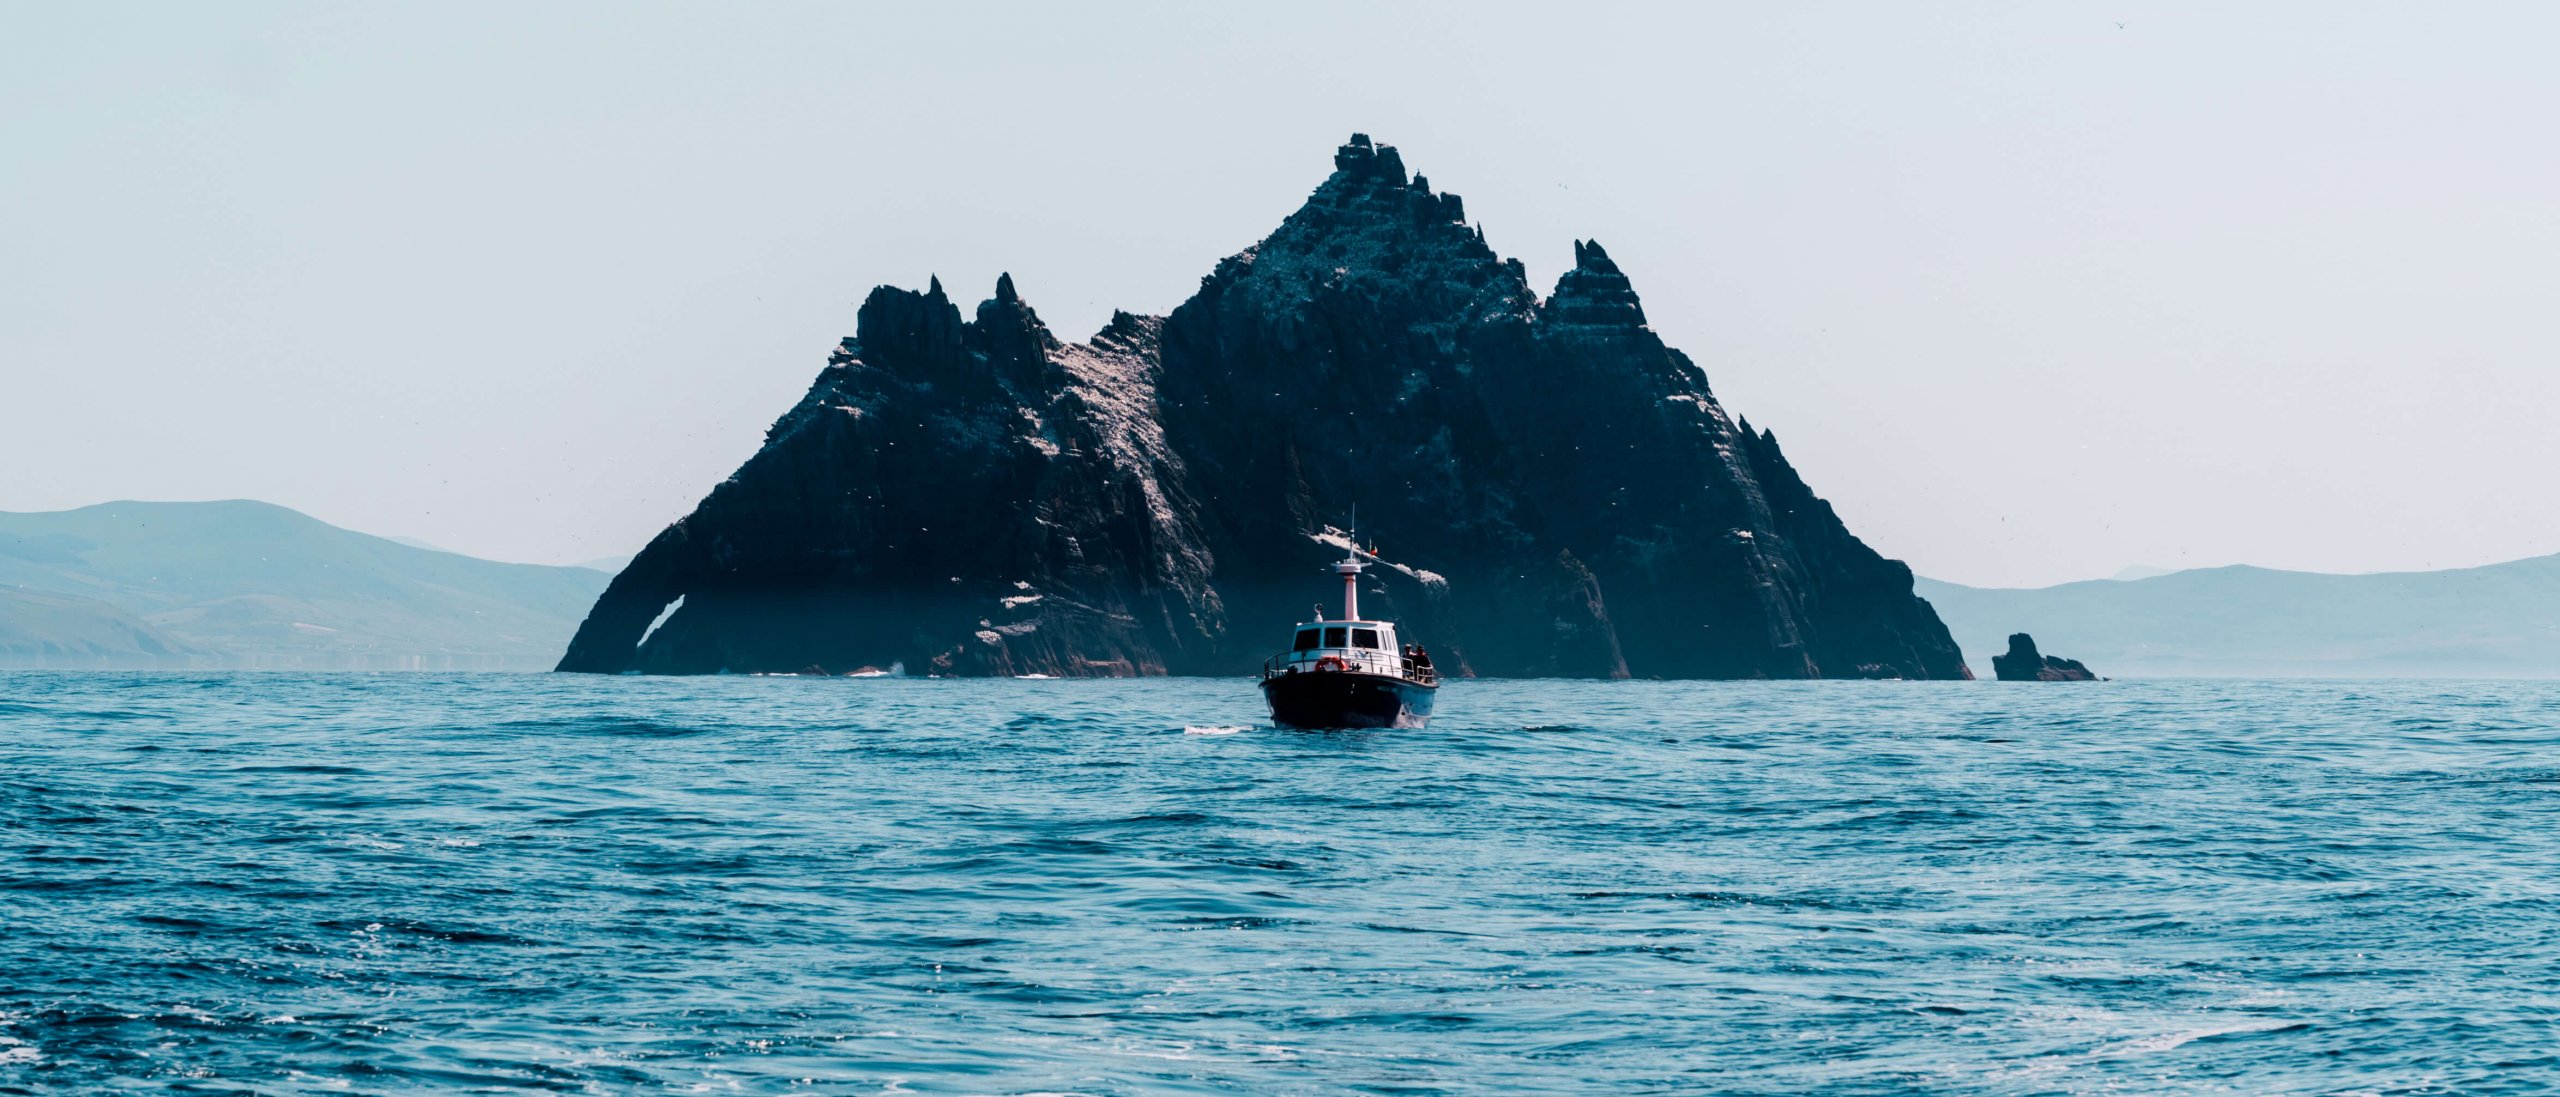 A boat in front of Little Skellig island off the coast of Ireland